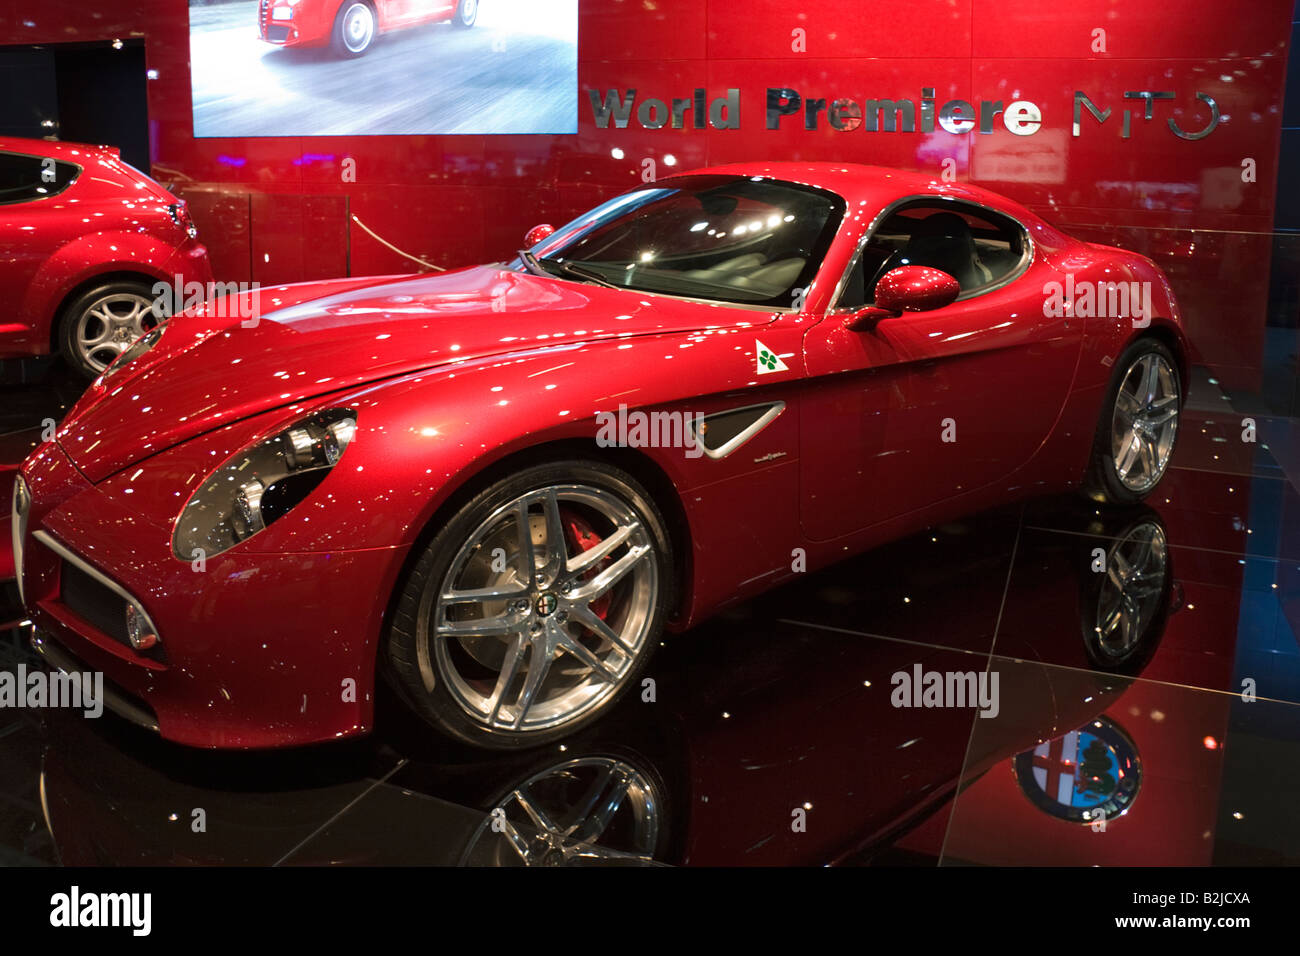 A bright red Alpha Romeo 8C Competizione supercar on display at the British Motor Show at ExCel in July 2008 Stock Photo